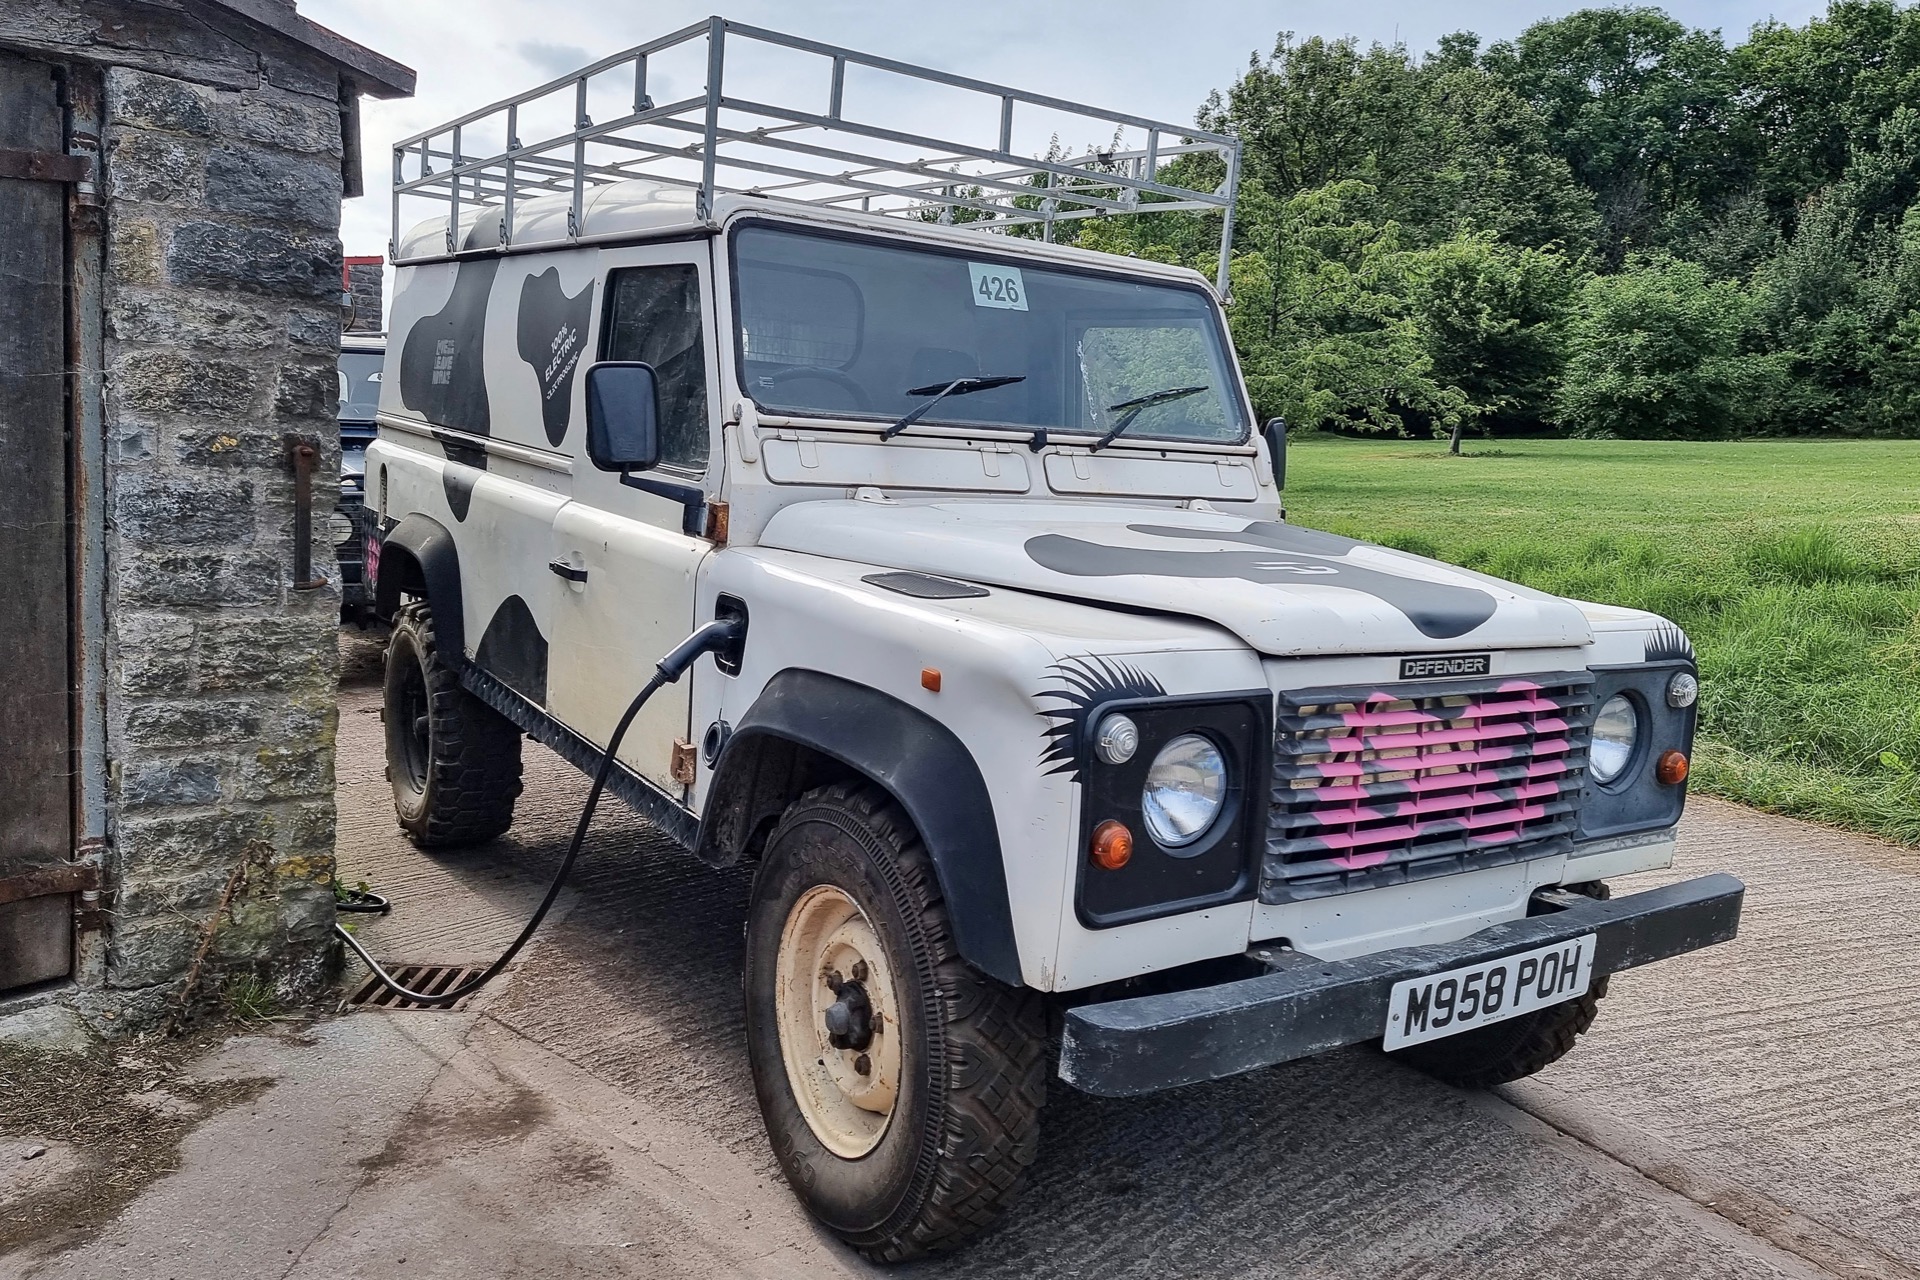 Drop-in electric conversion kit for Land Rover Defender: Make your own  electric SUV